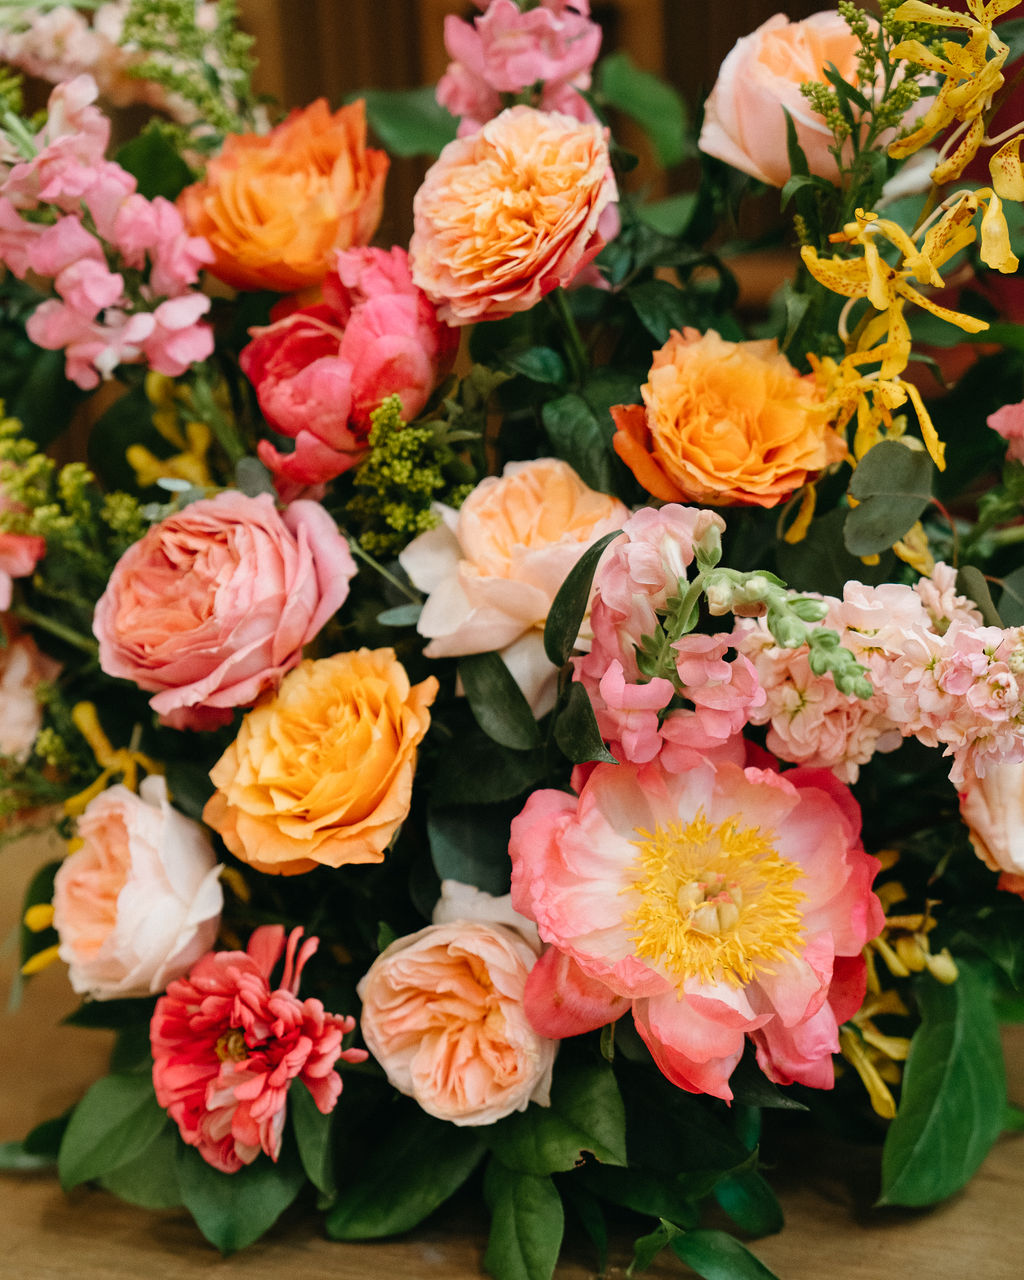 Timeless Wedding with Colorful Flowers from Belles Fleurs